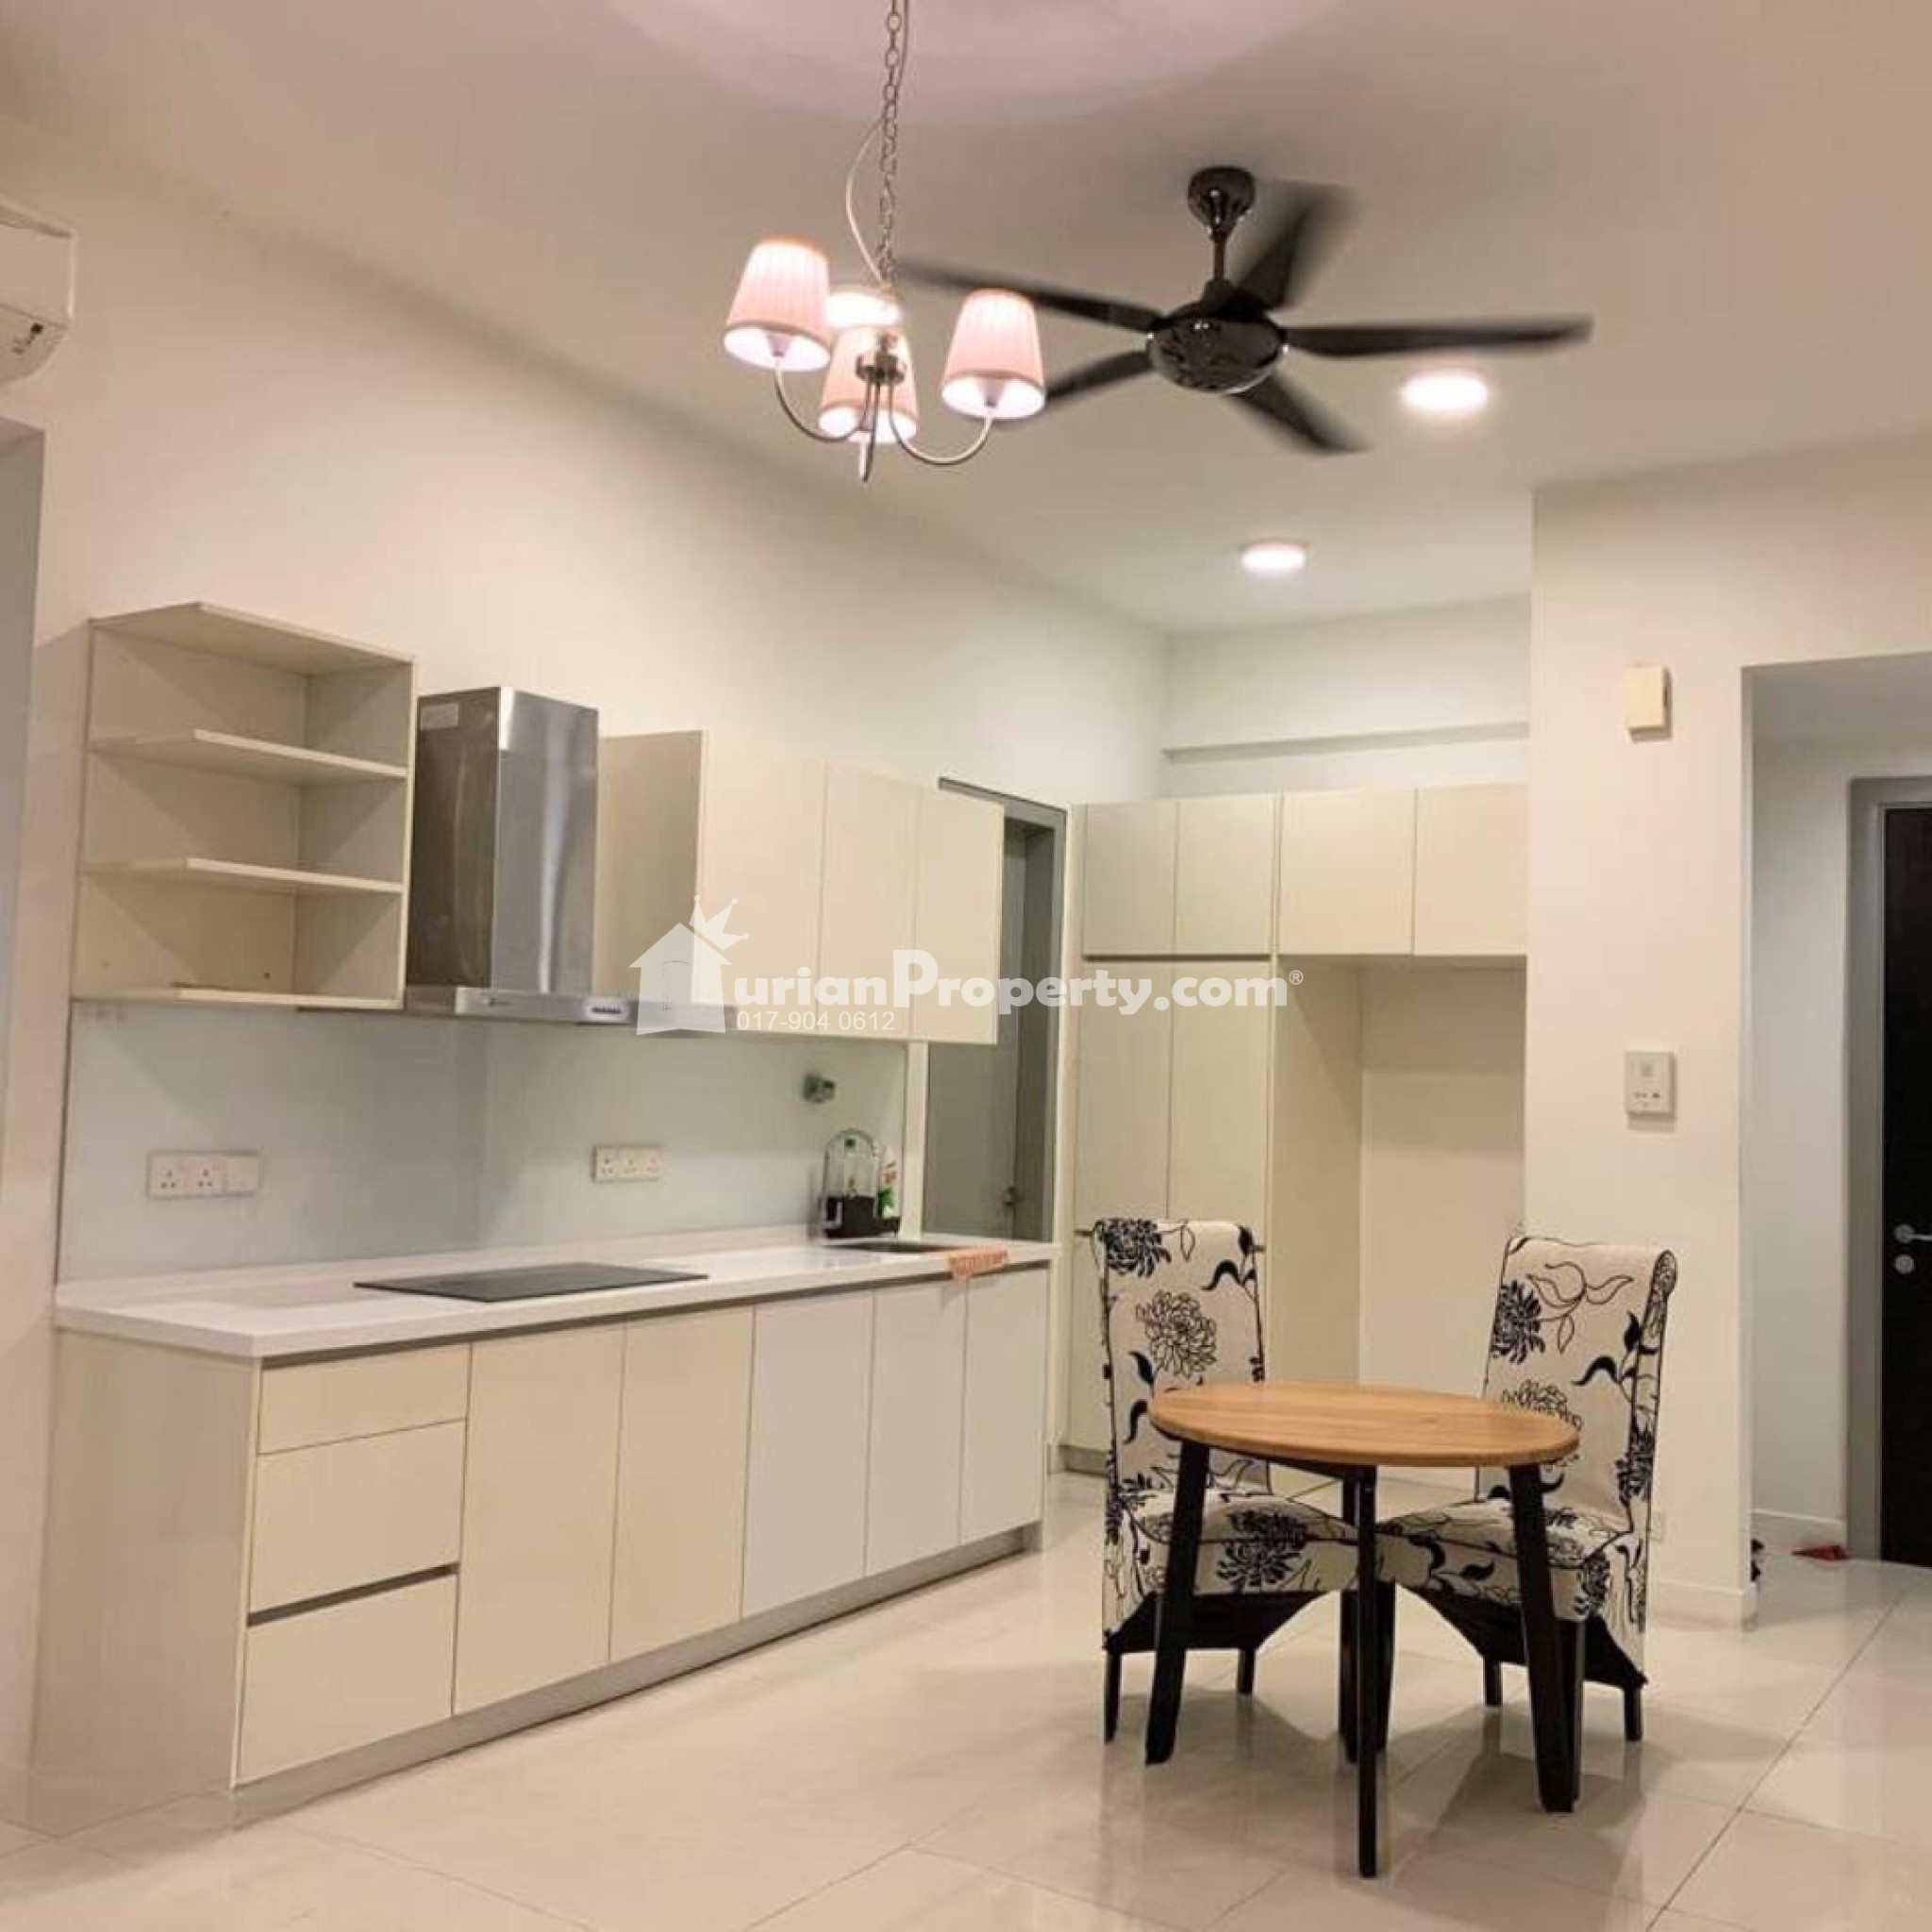 Condo For Rent at Reflection Residence